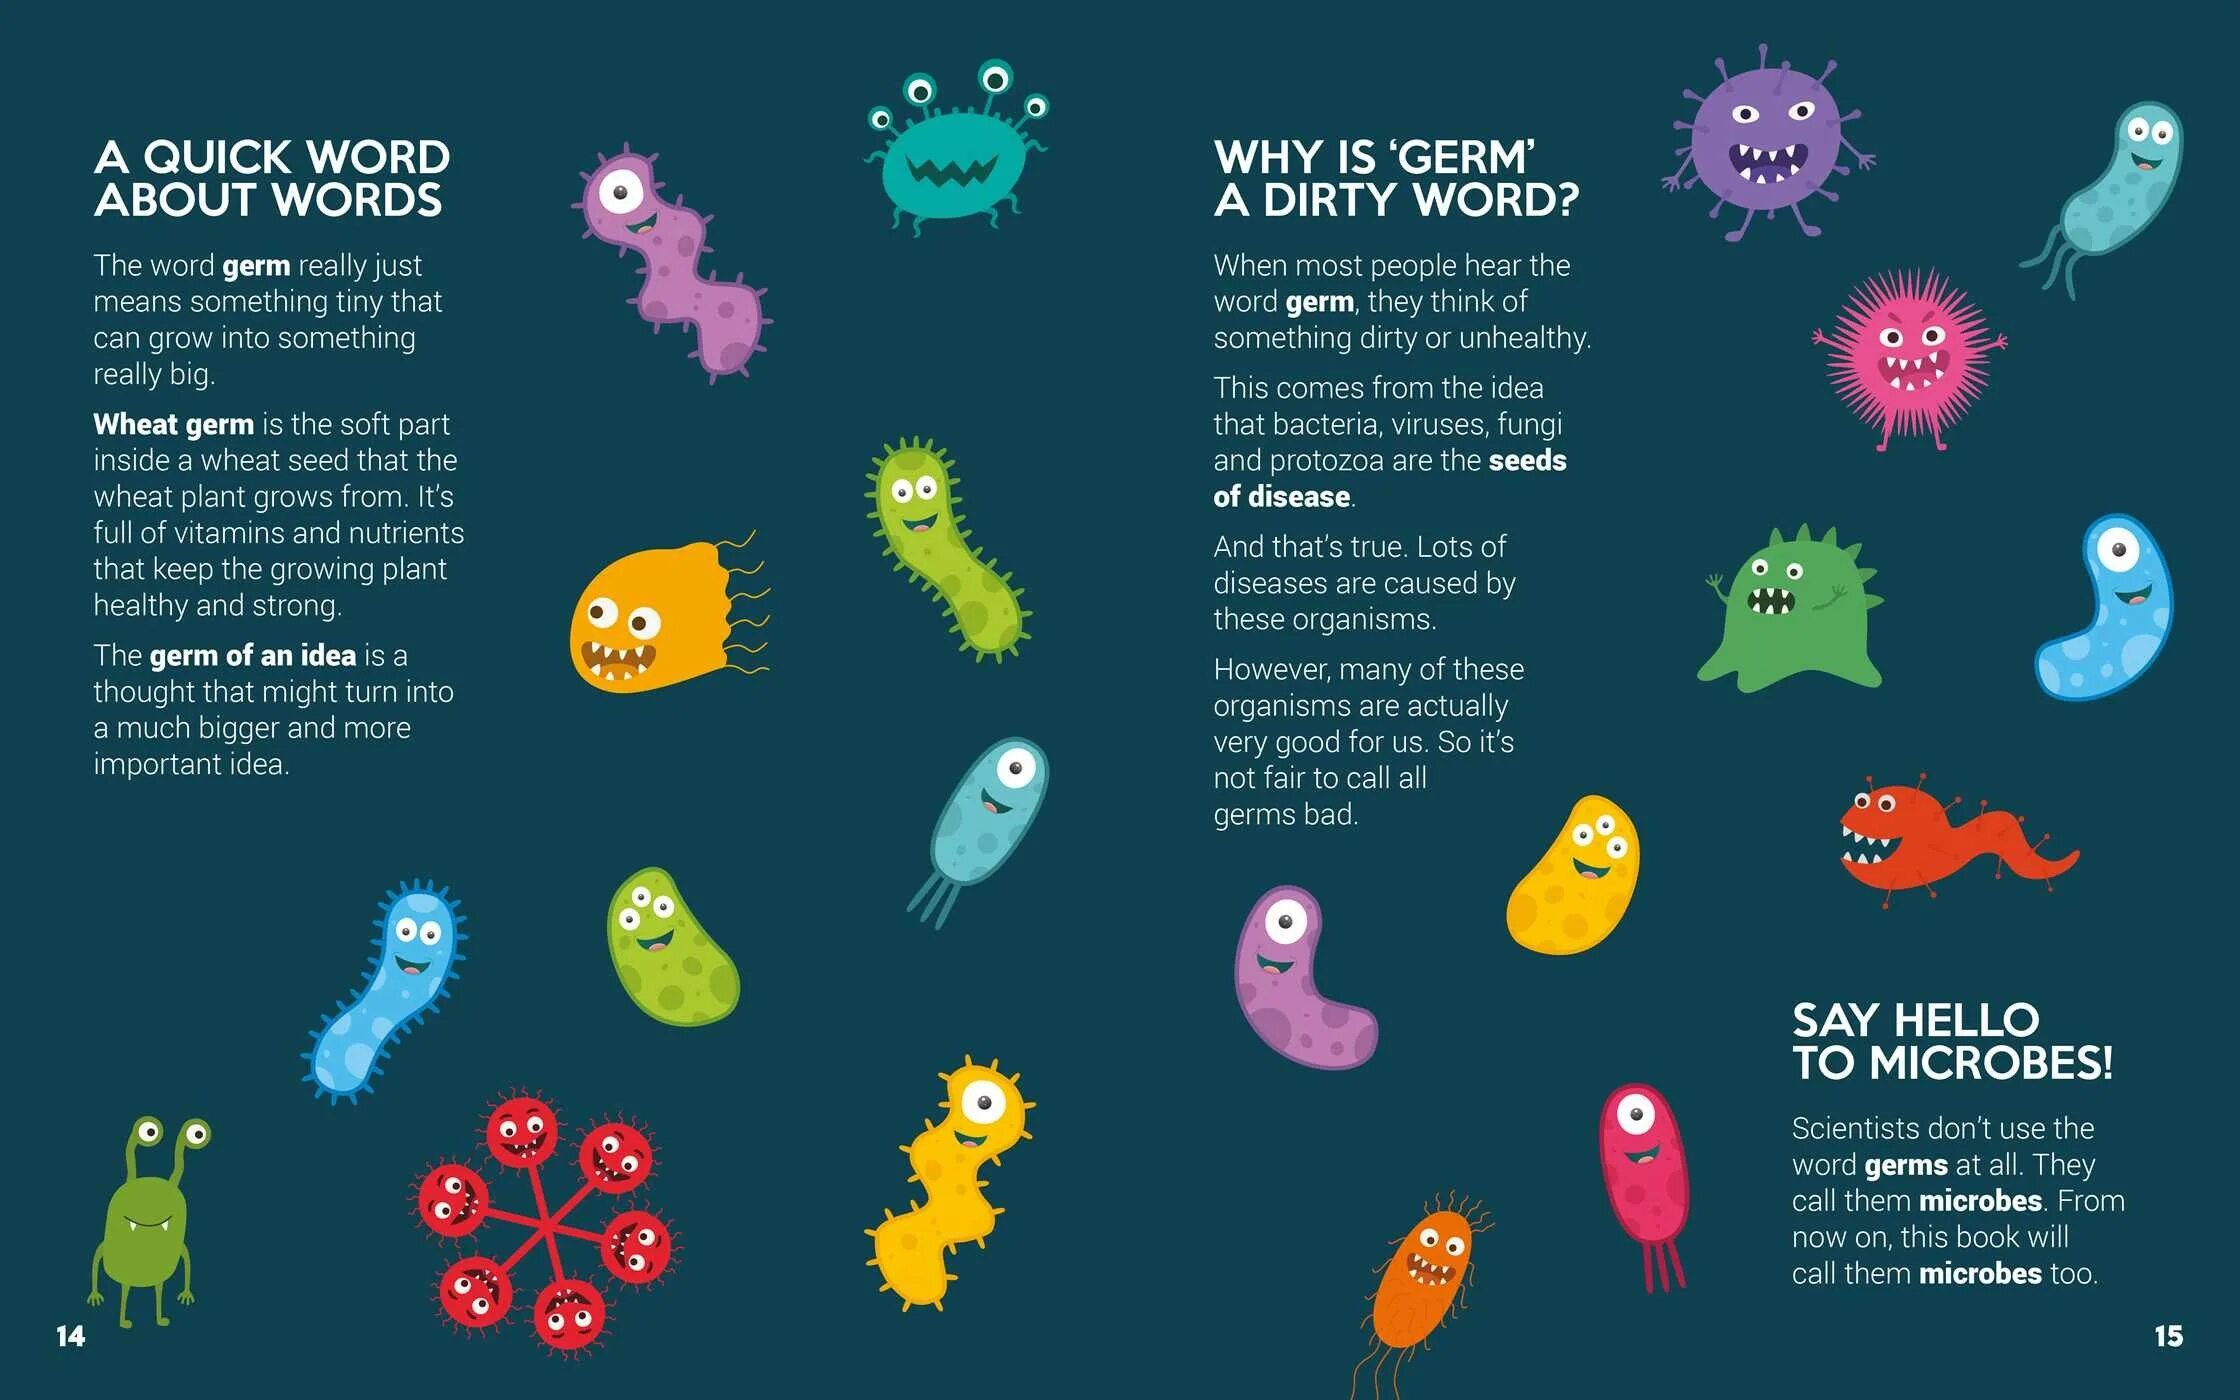 Germs группа. Book about Germs. Germs bombing настольная игра. Germ meaning.